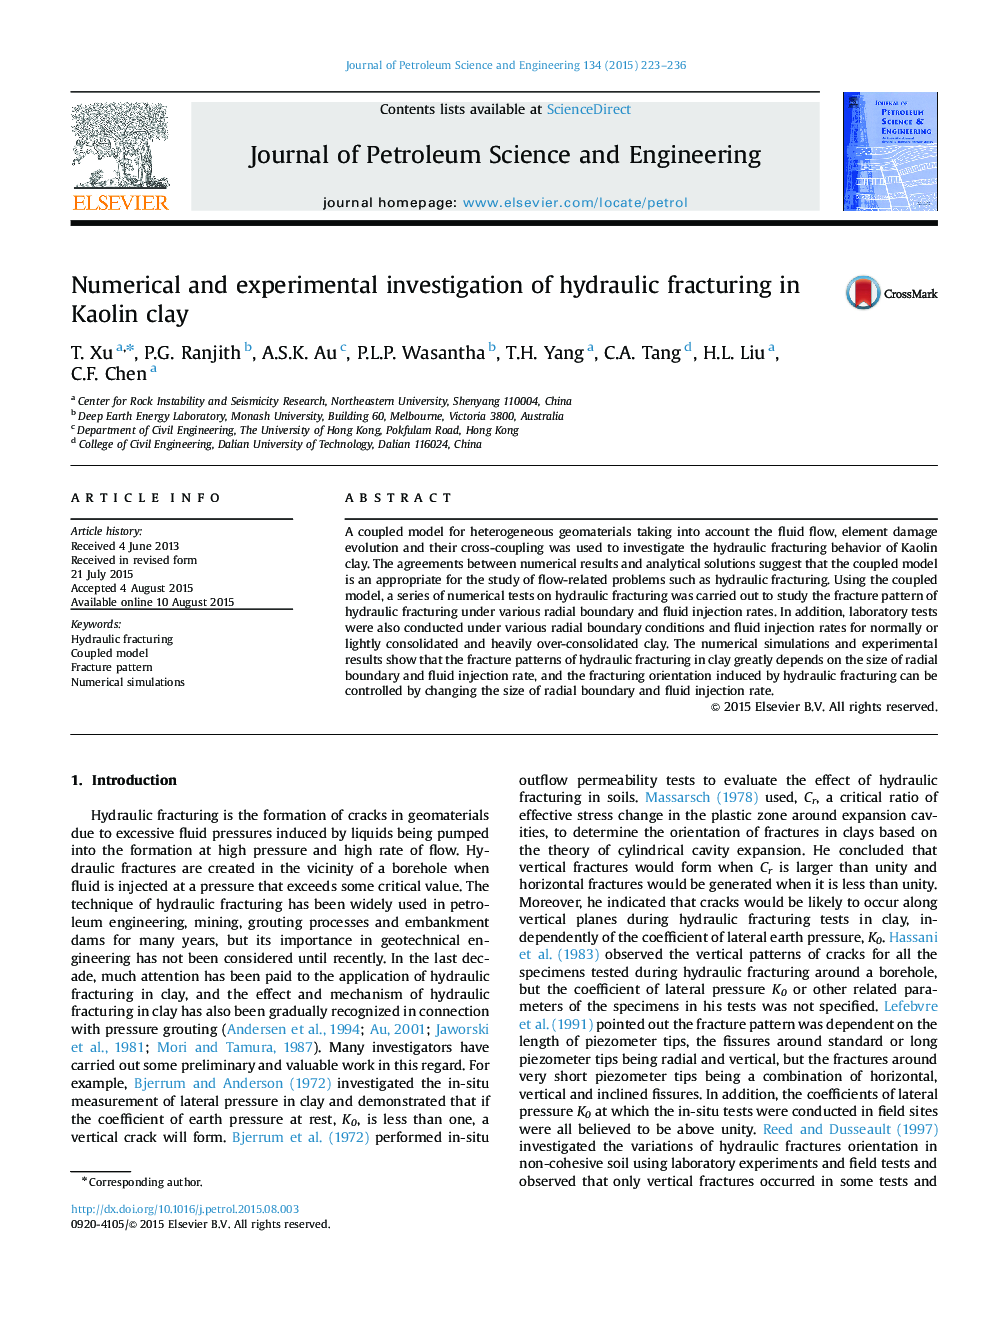 Numerical and experimental investigation of hydraulic fracturing in Kaolin clay